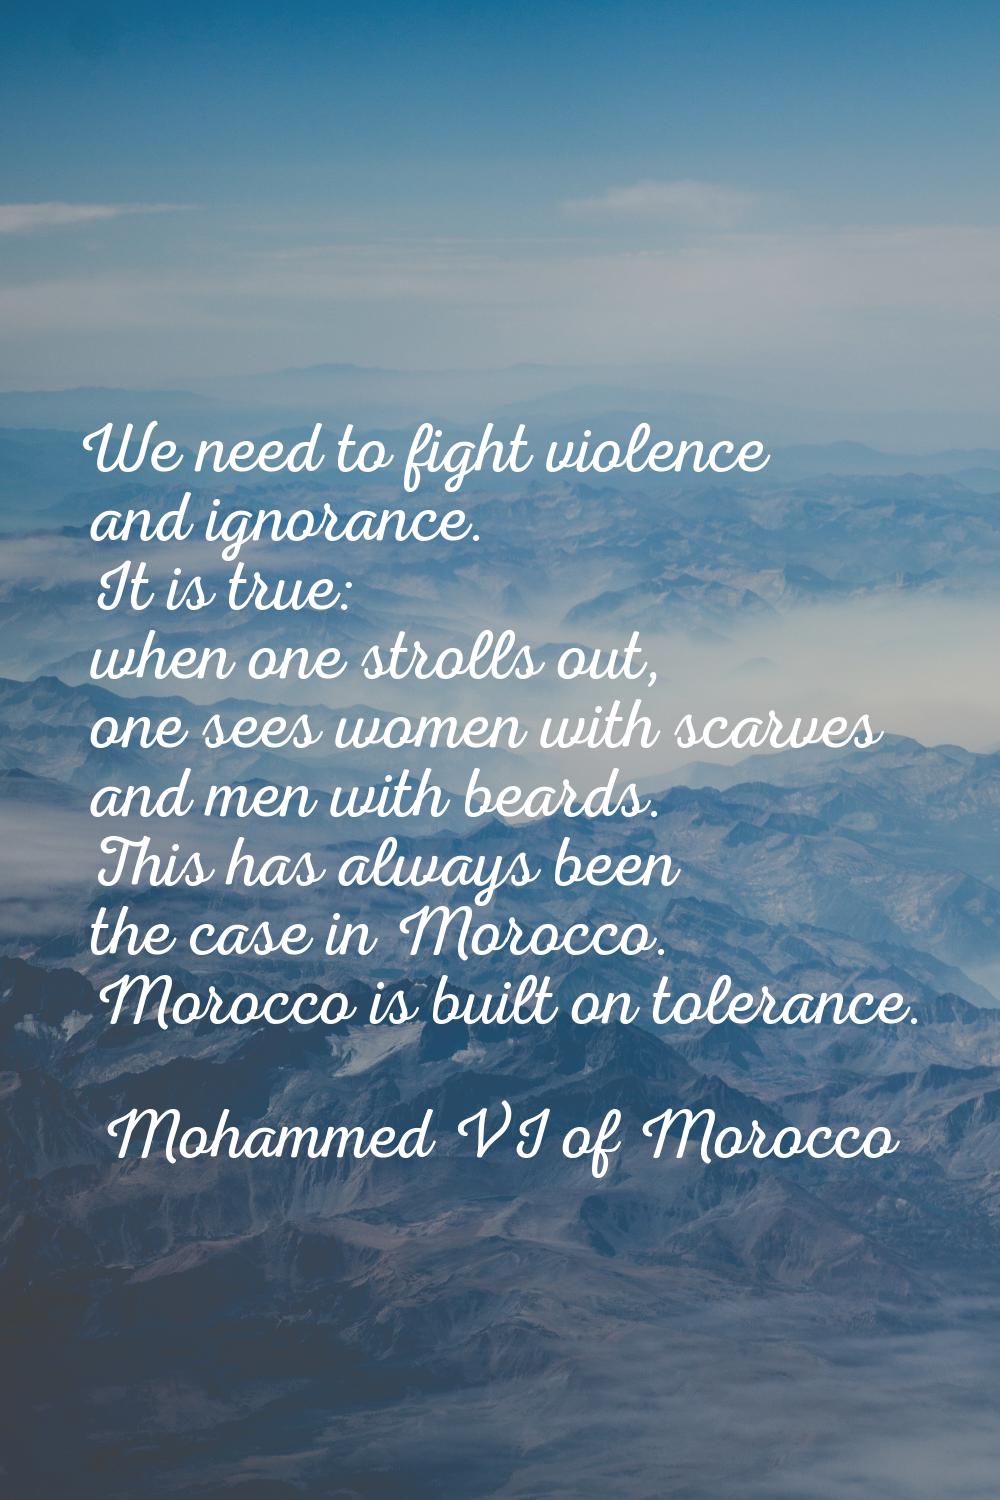 We need to fight violence and ignorance. It is true: when one strolls out, one sees women with scar